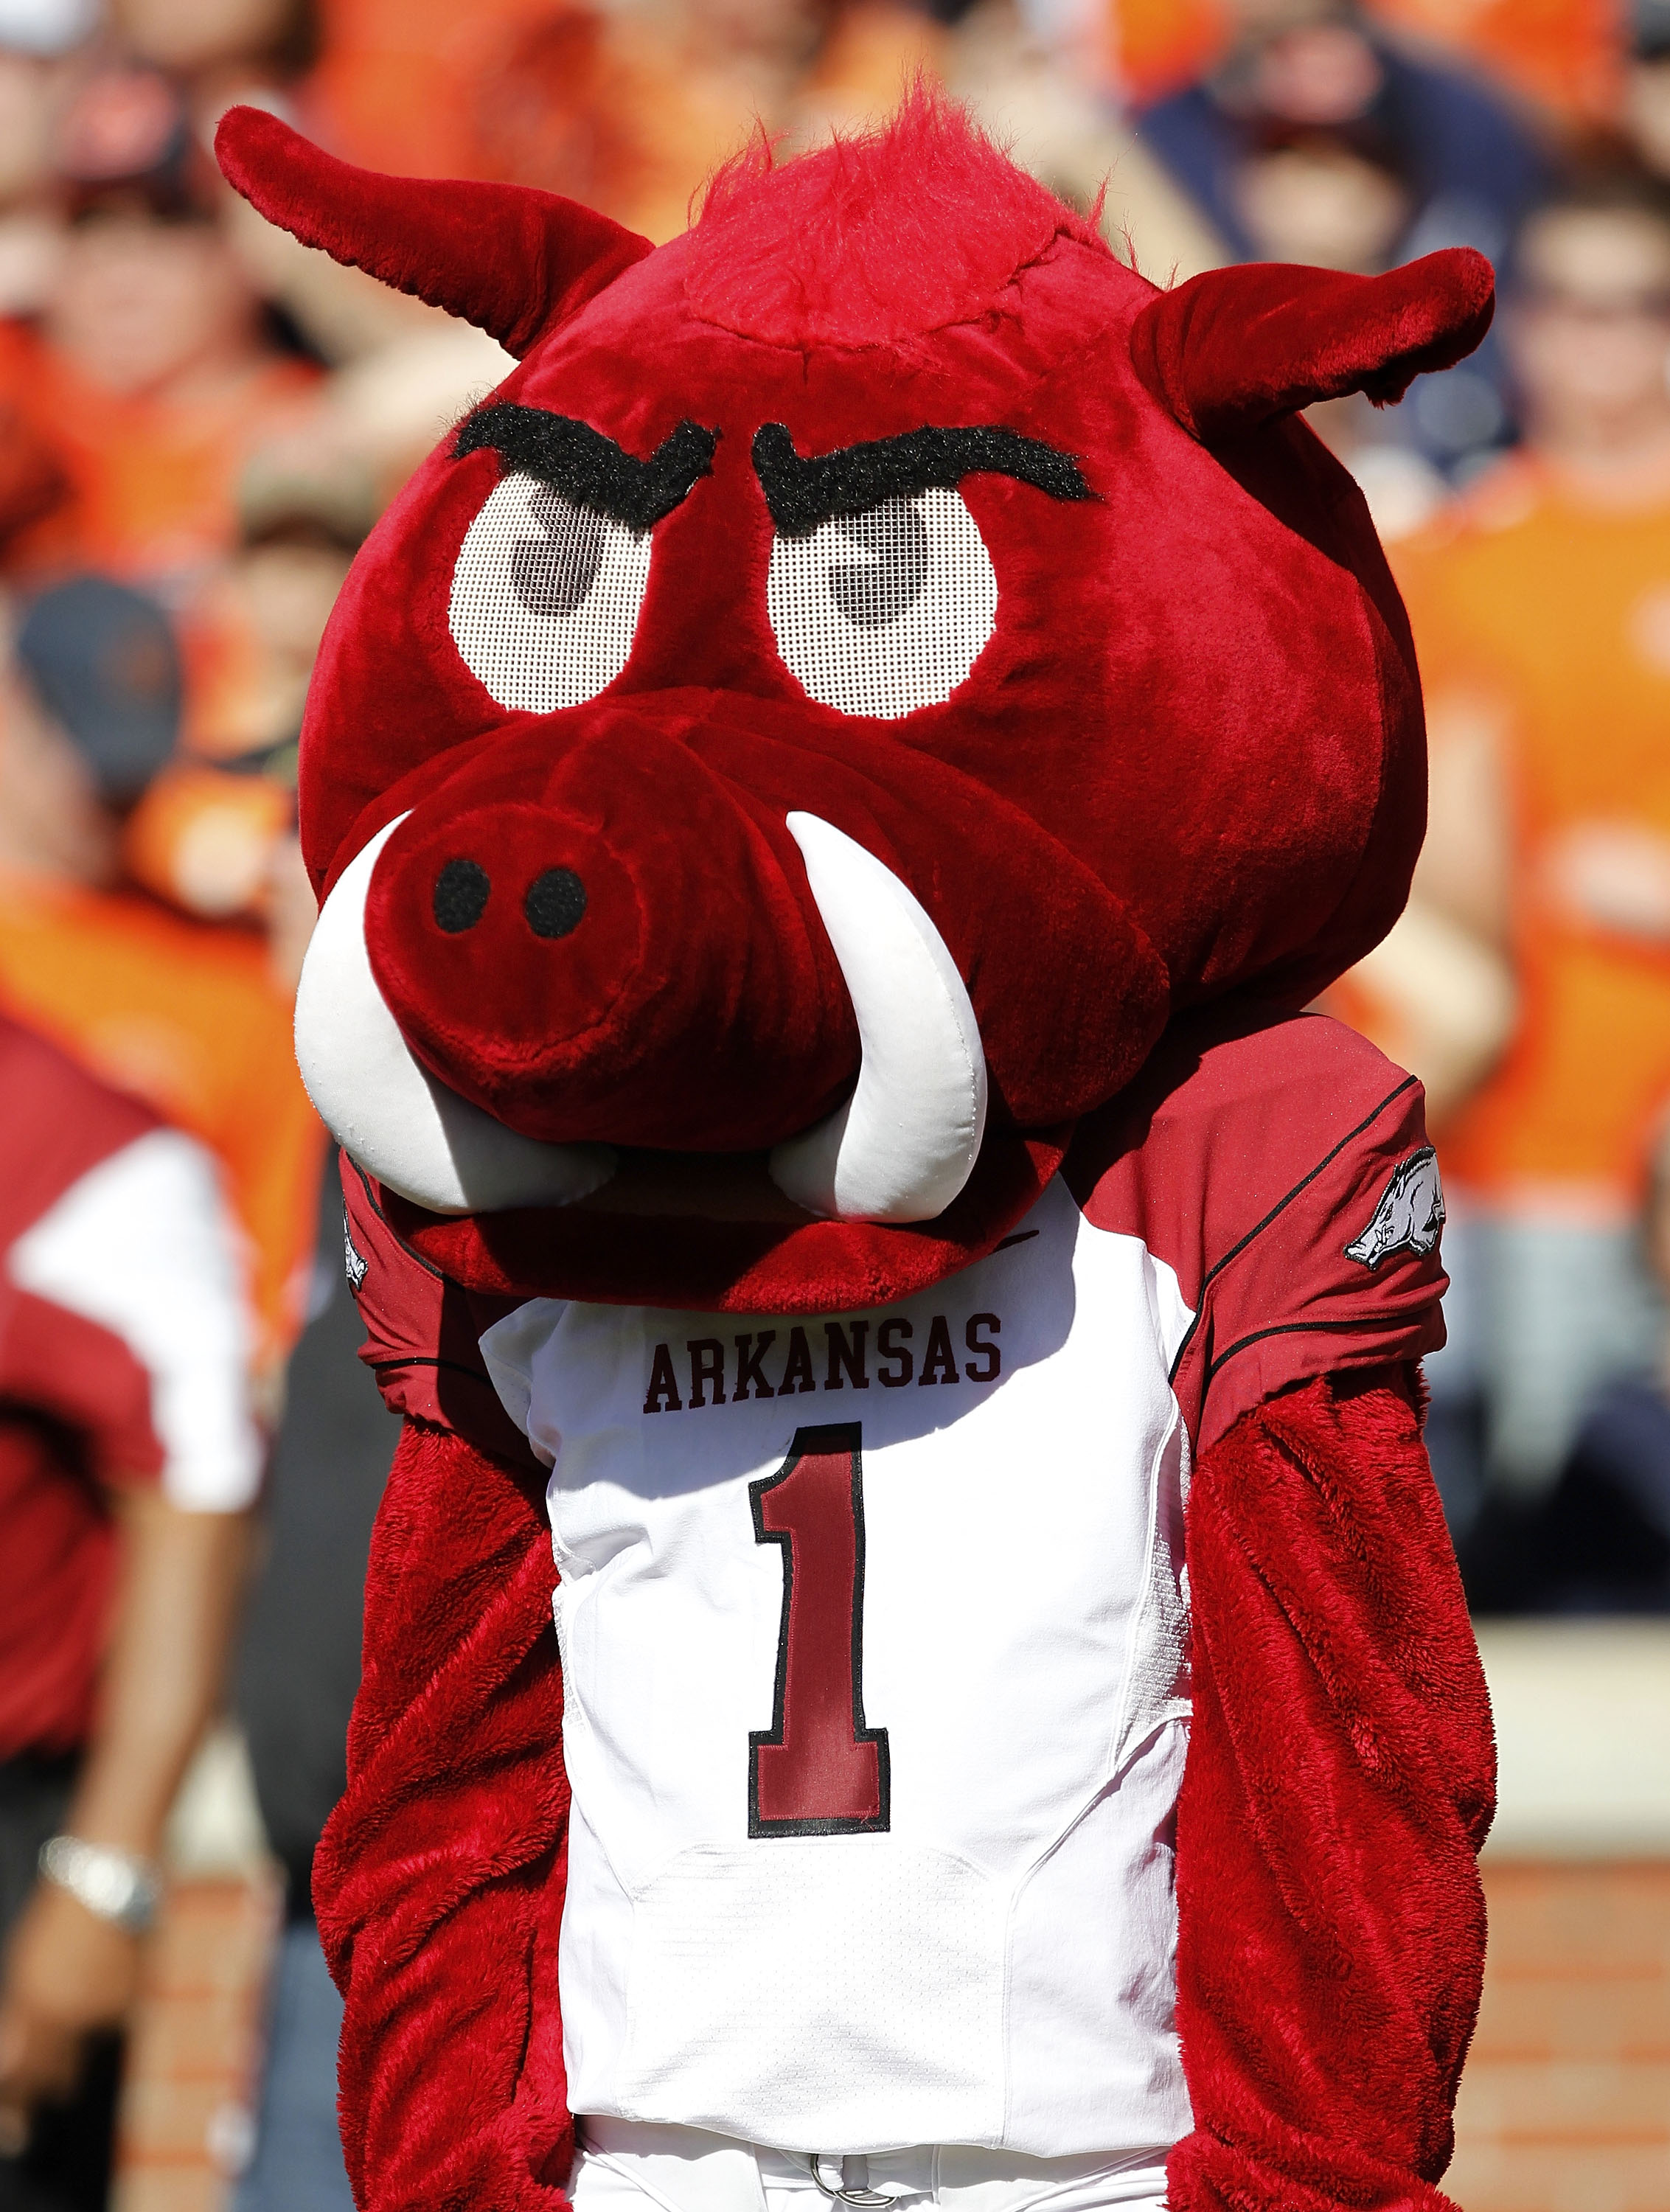 AUBURN - OCTOBER 16:  Arkansas Razorbacks mascot Big Red watches the action on the field during the game against the Auburn Tigers at Jordan-Hare Stadium on October 16, 2010 in Auburn, Alabama.  (Photo by Mike Zarrilli/Getty Images)